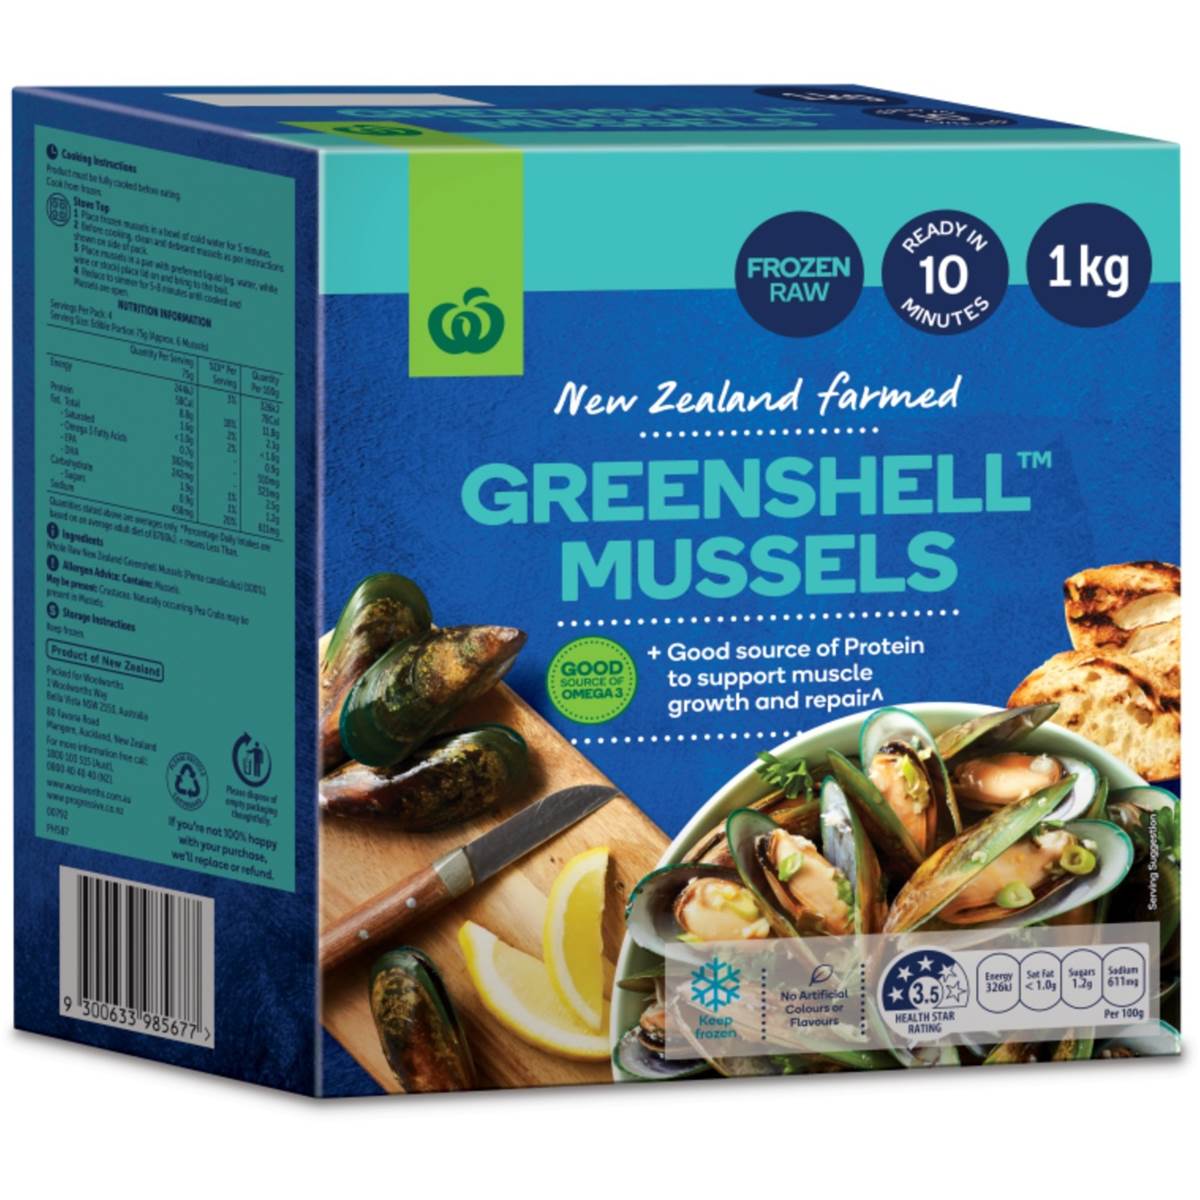 Calories in Woolworths Greenshell Mussels